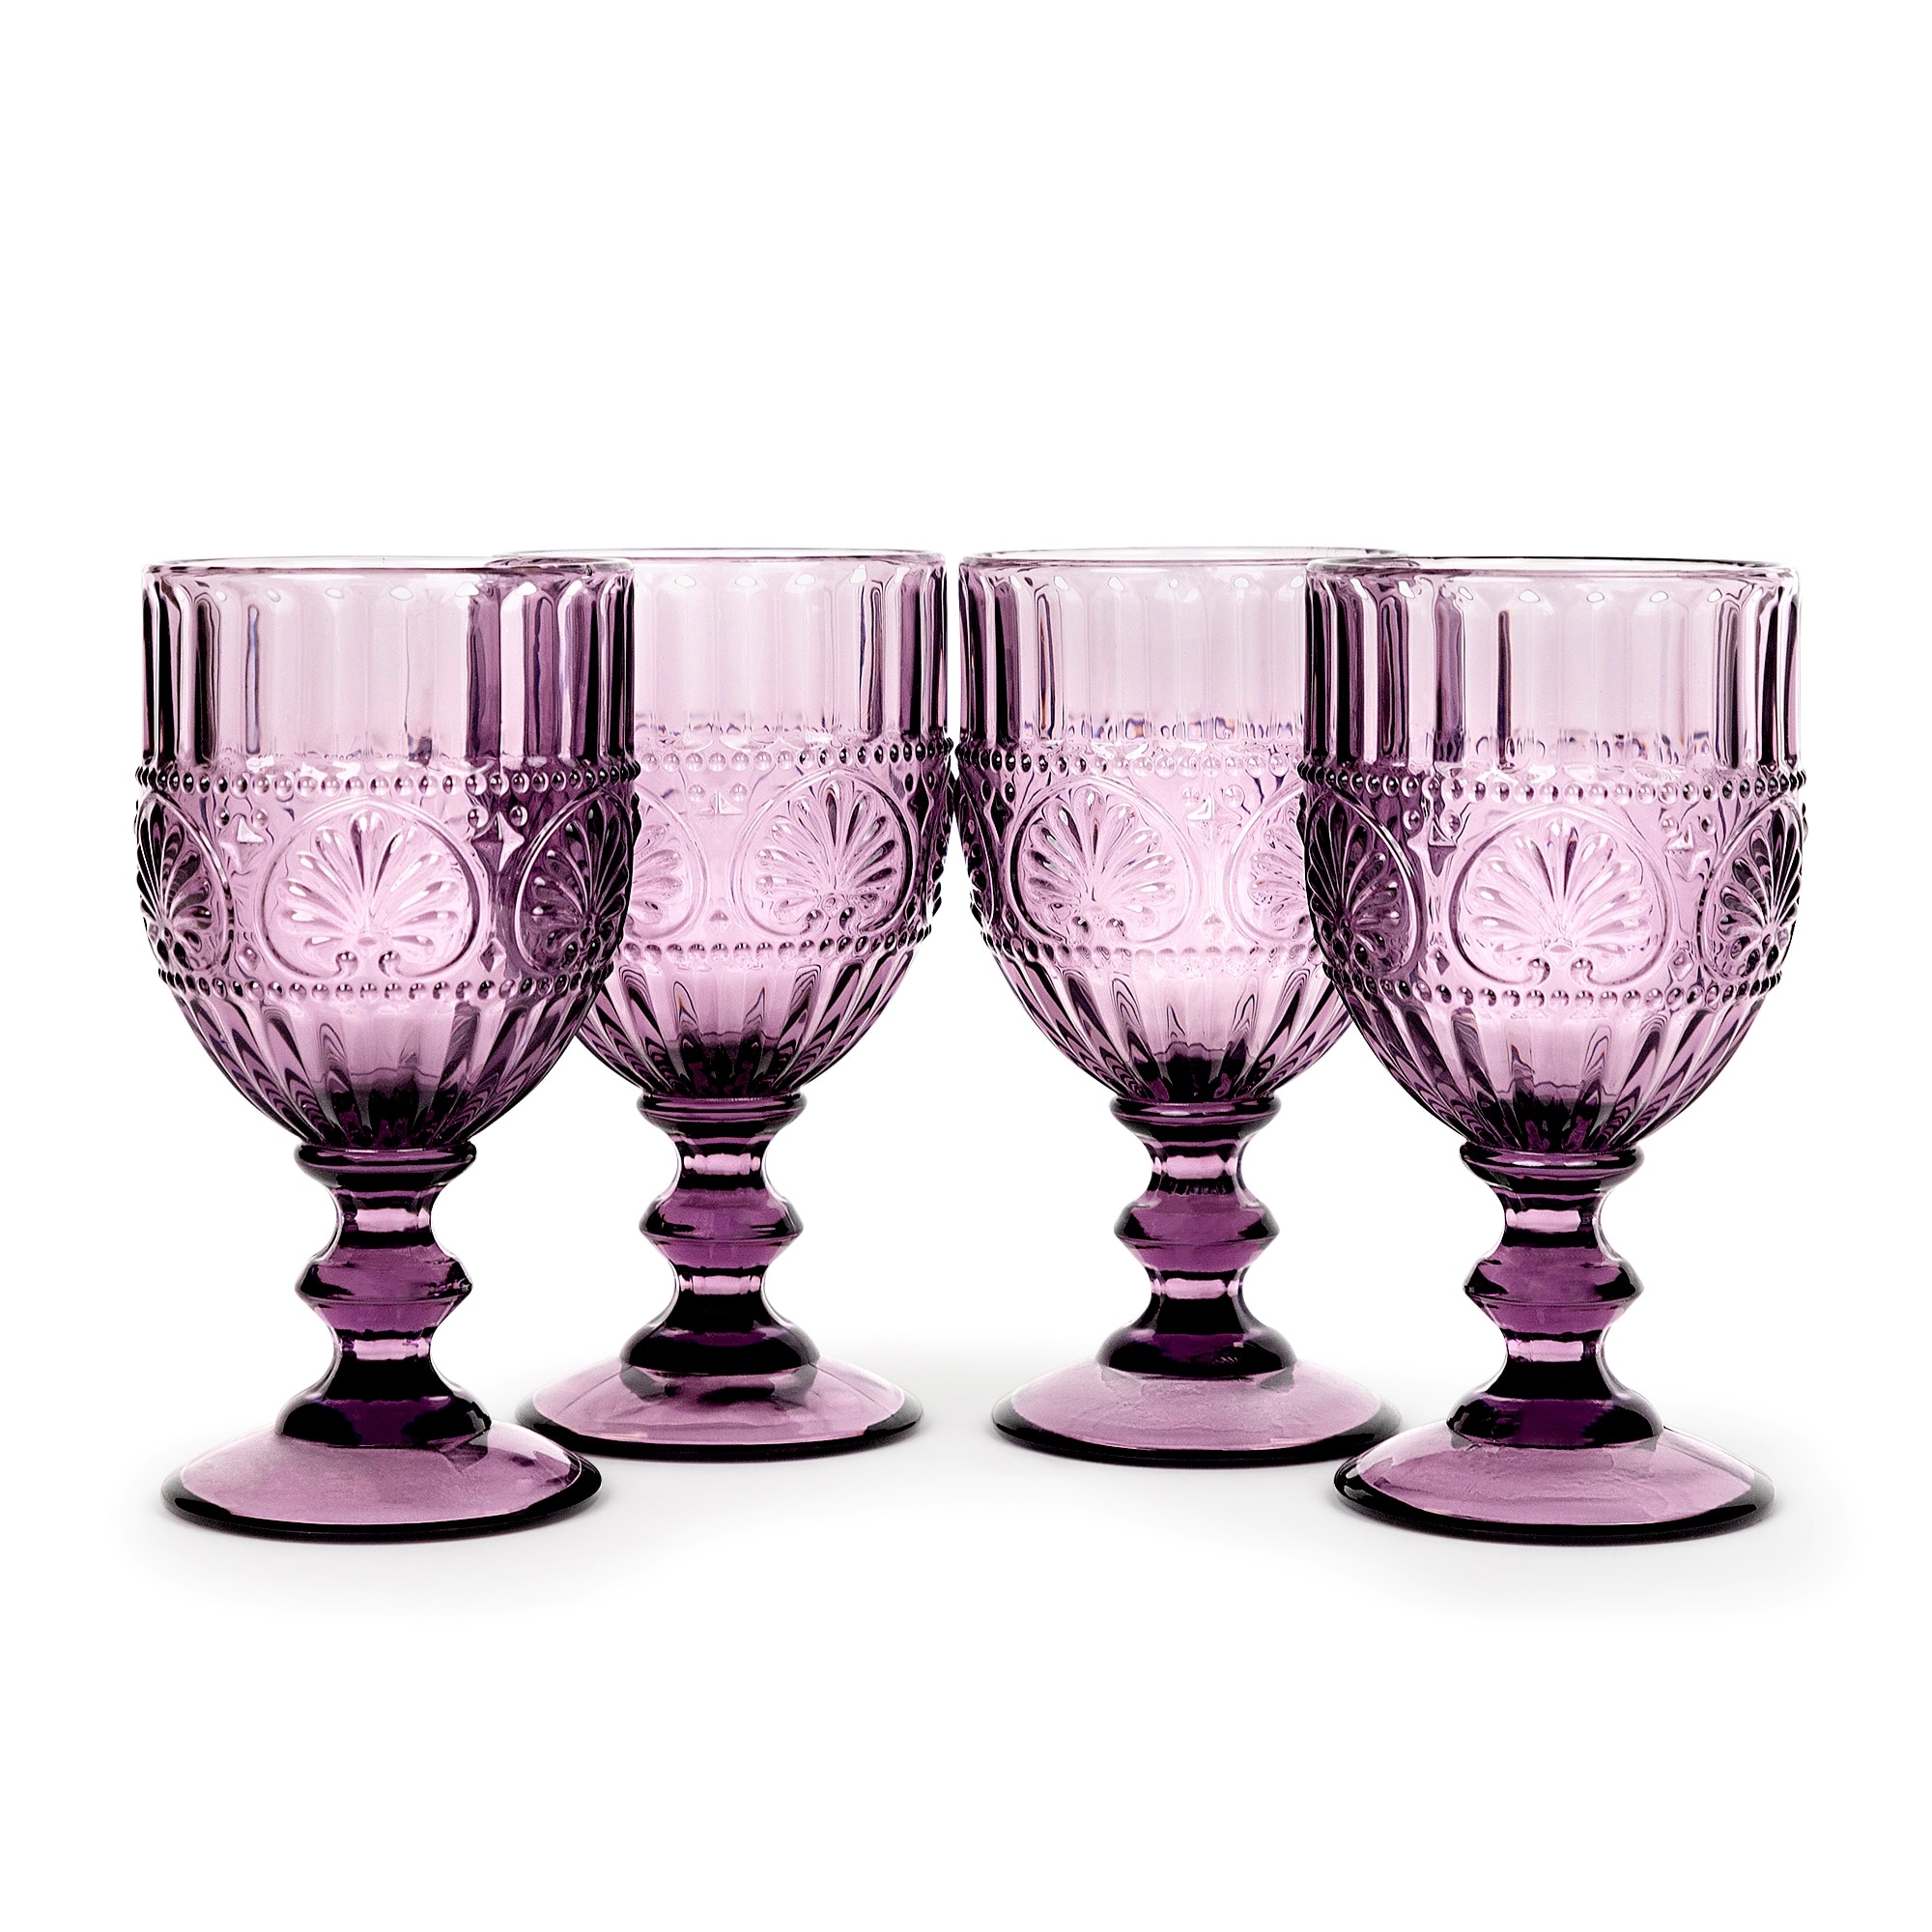 Colored Wine Glass Set, 12oz Glasses Set of 6 For All Occasions & Special  Celebrations Gift For Him, Her, Wife, Friend Drinkware Unique Style Tall